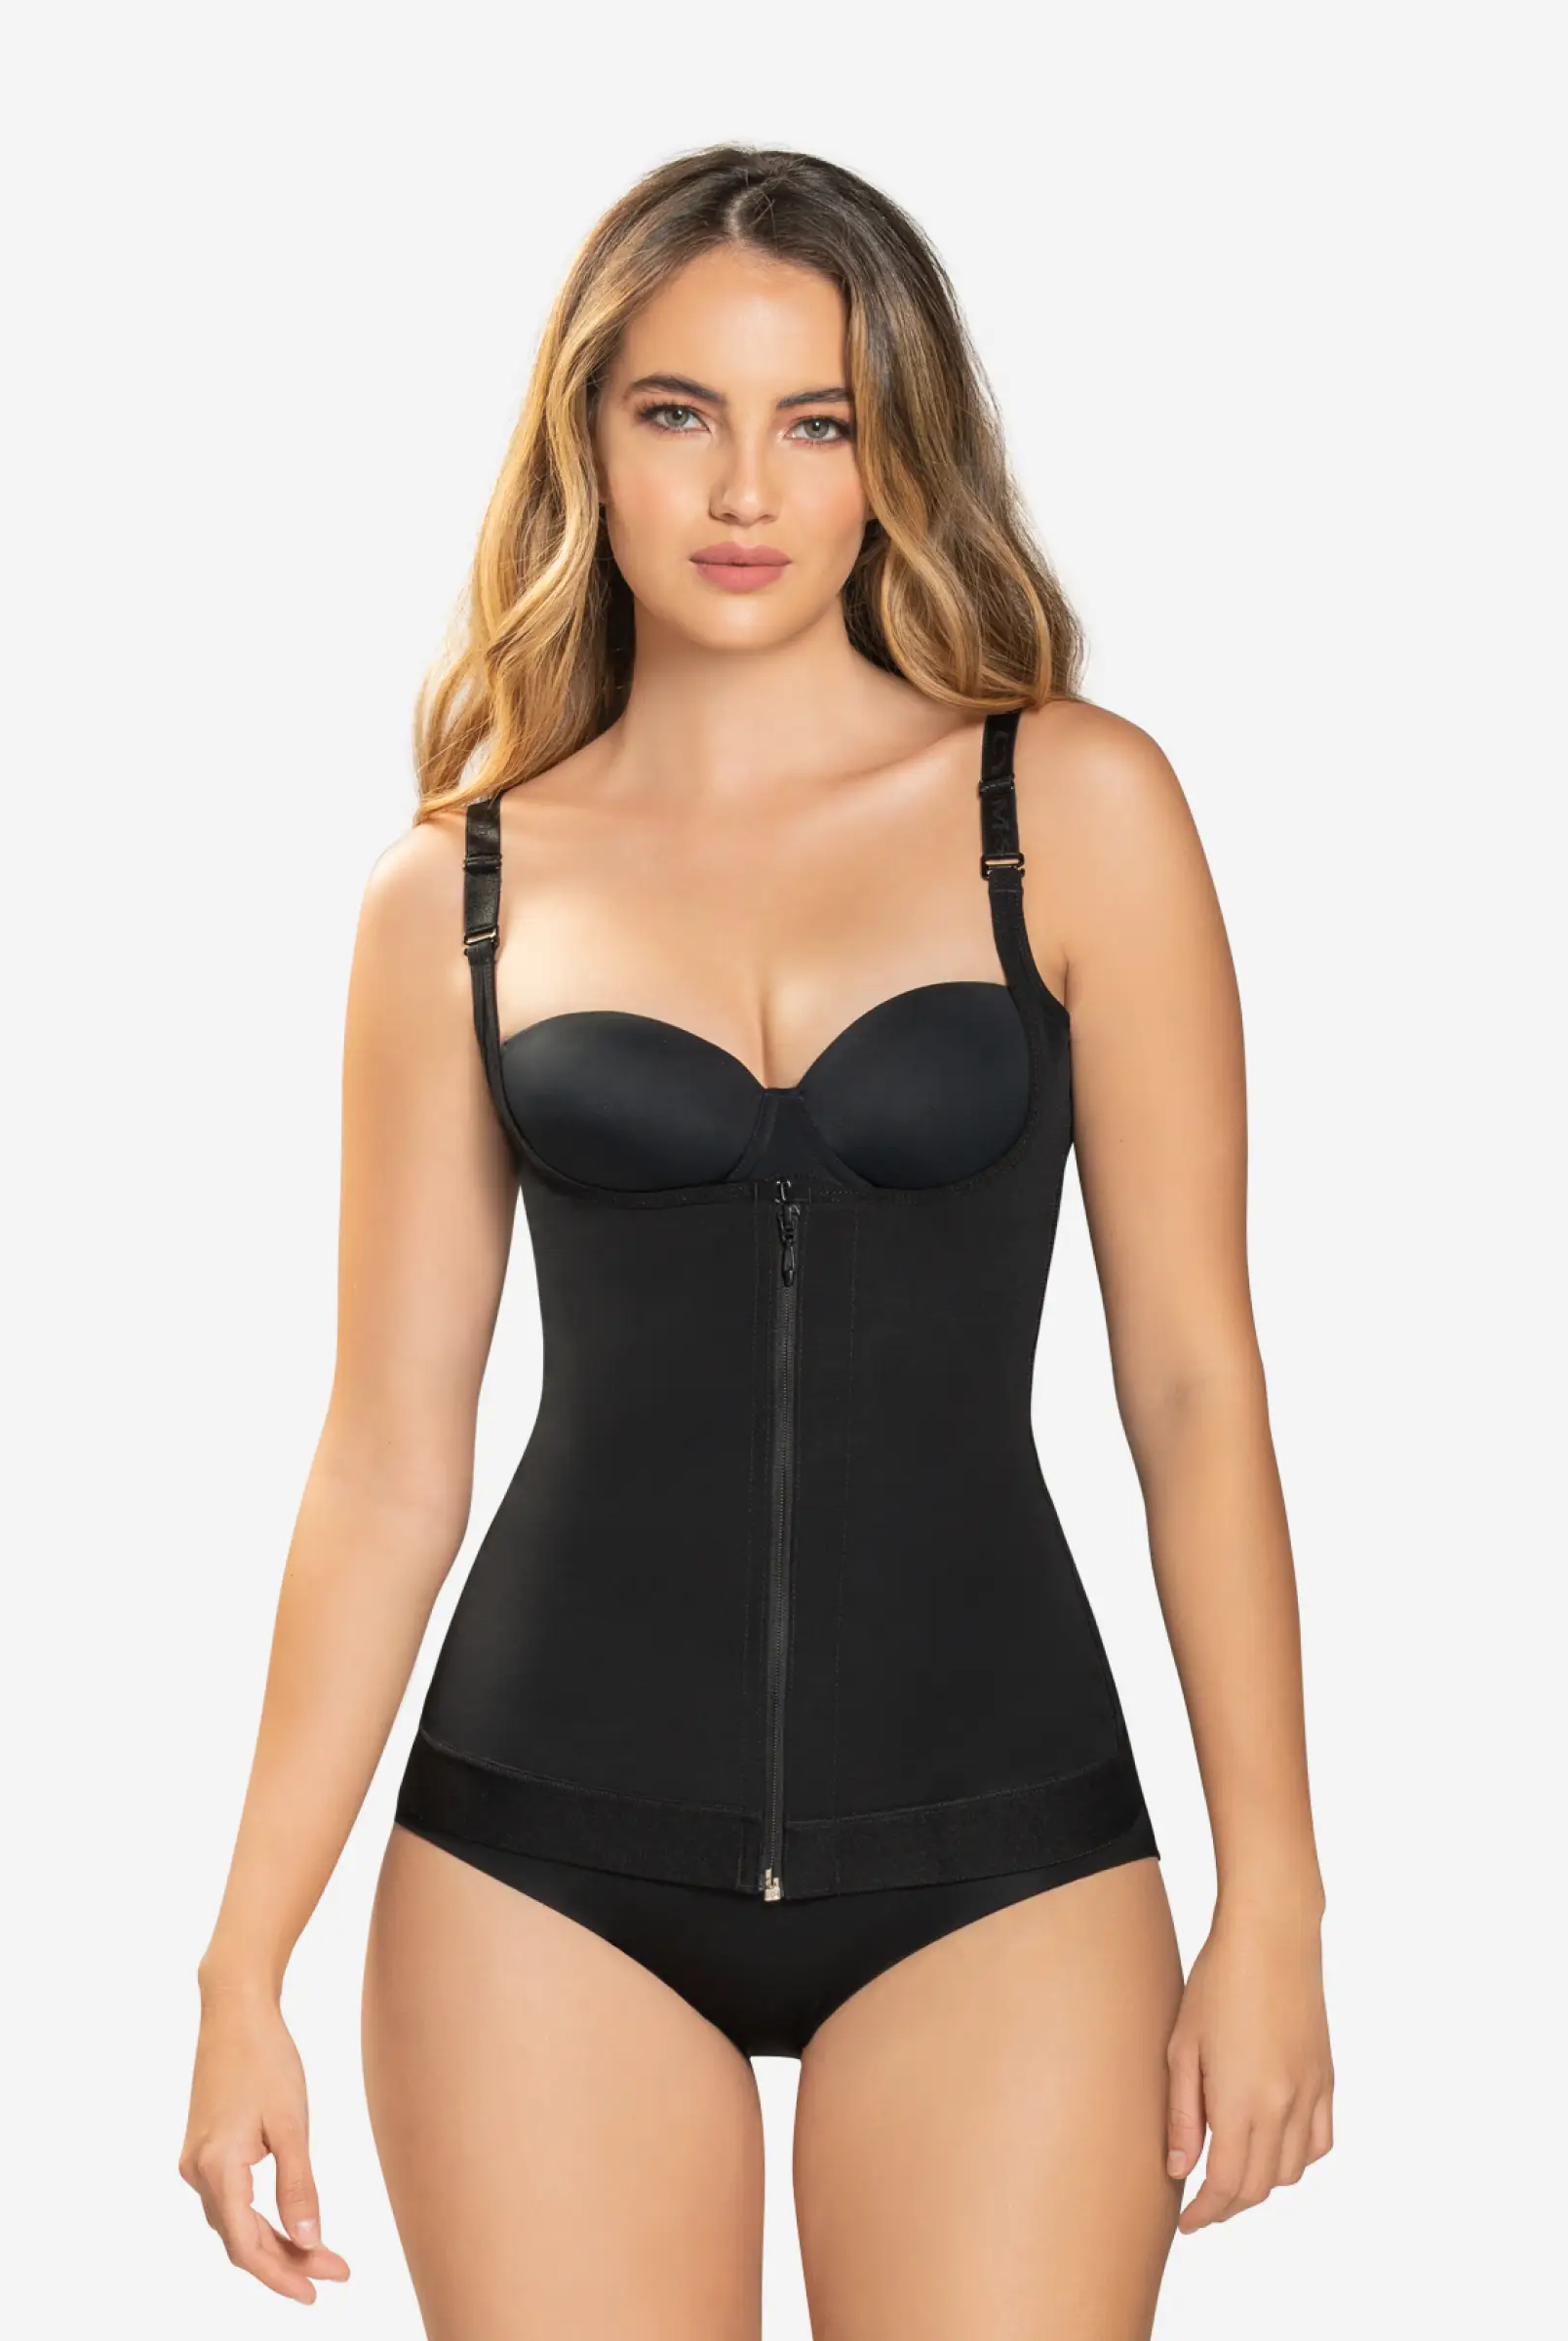 Cysm Slimming Body Shaper with Back Support –